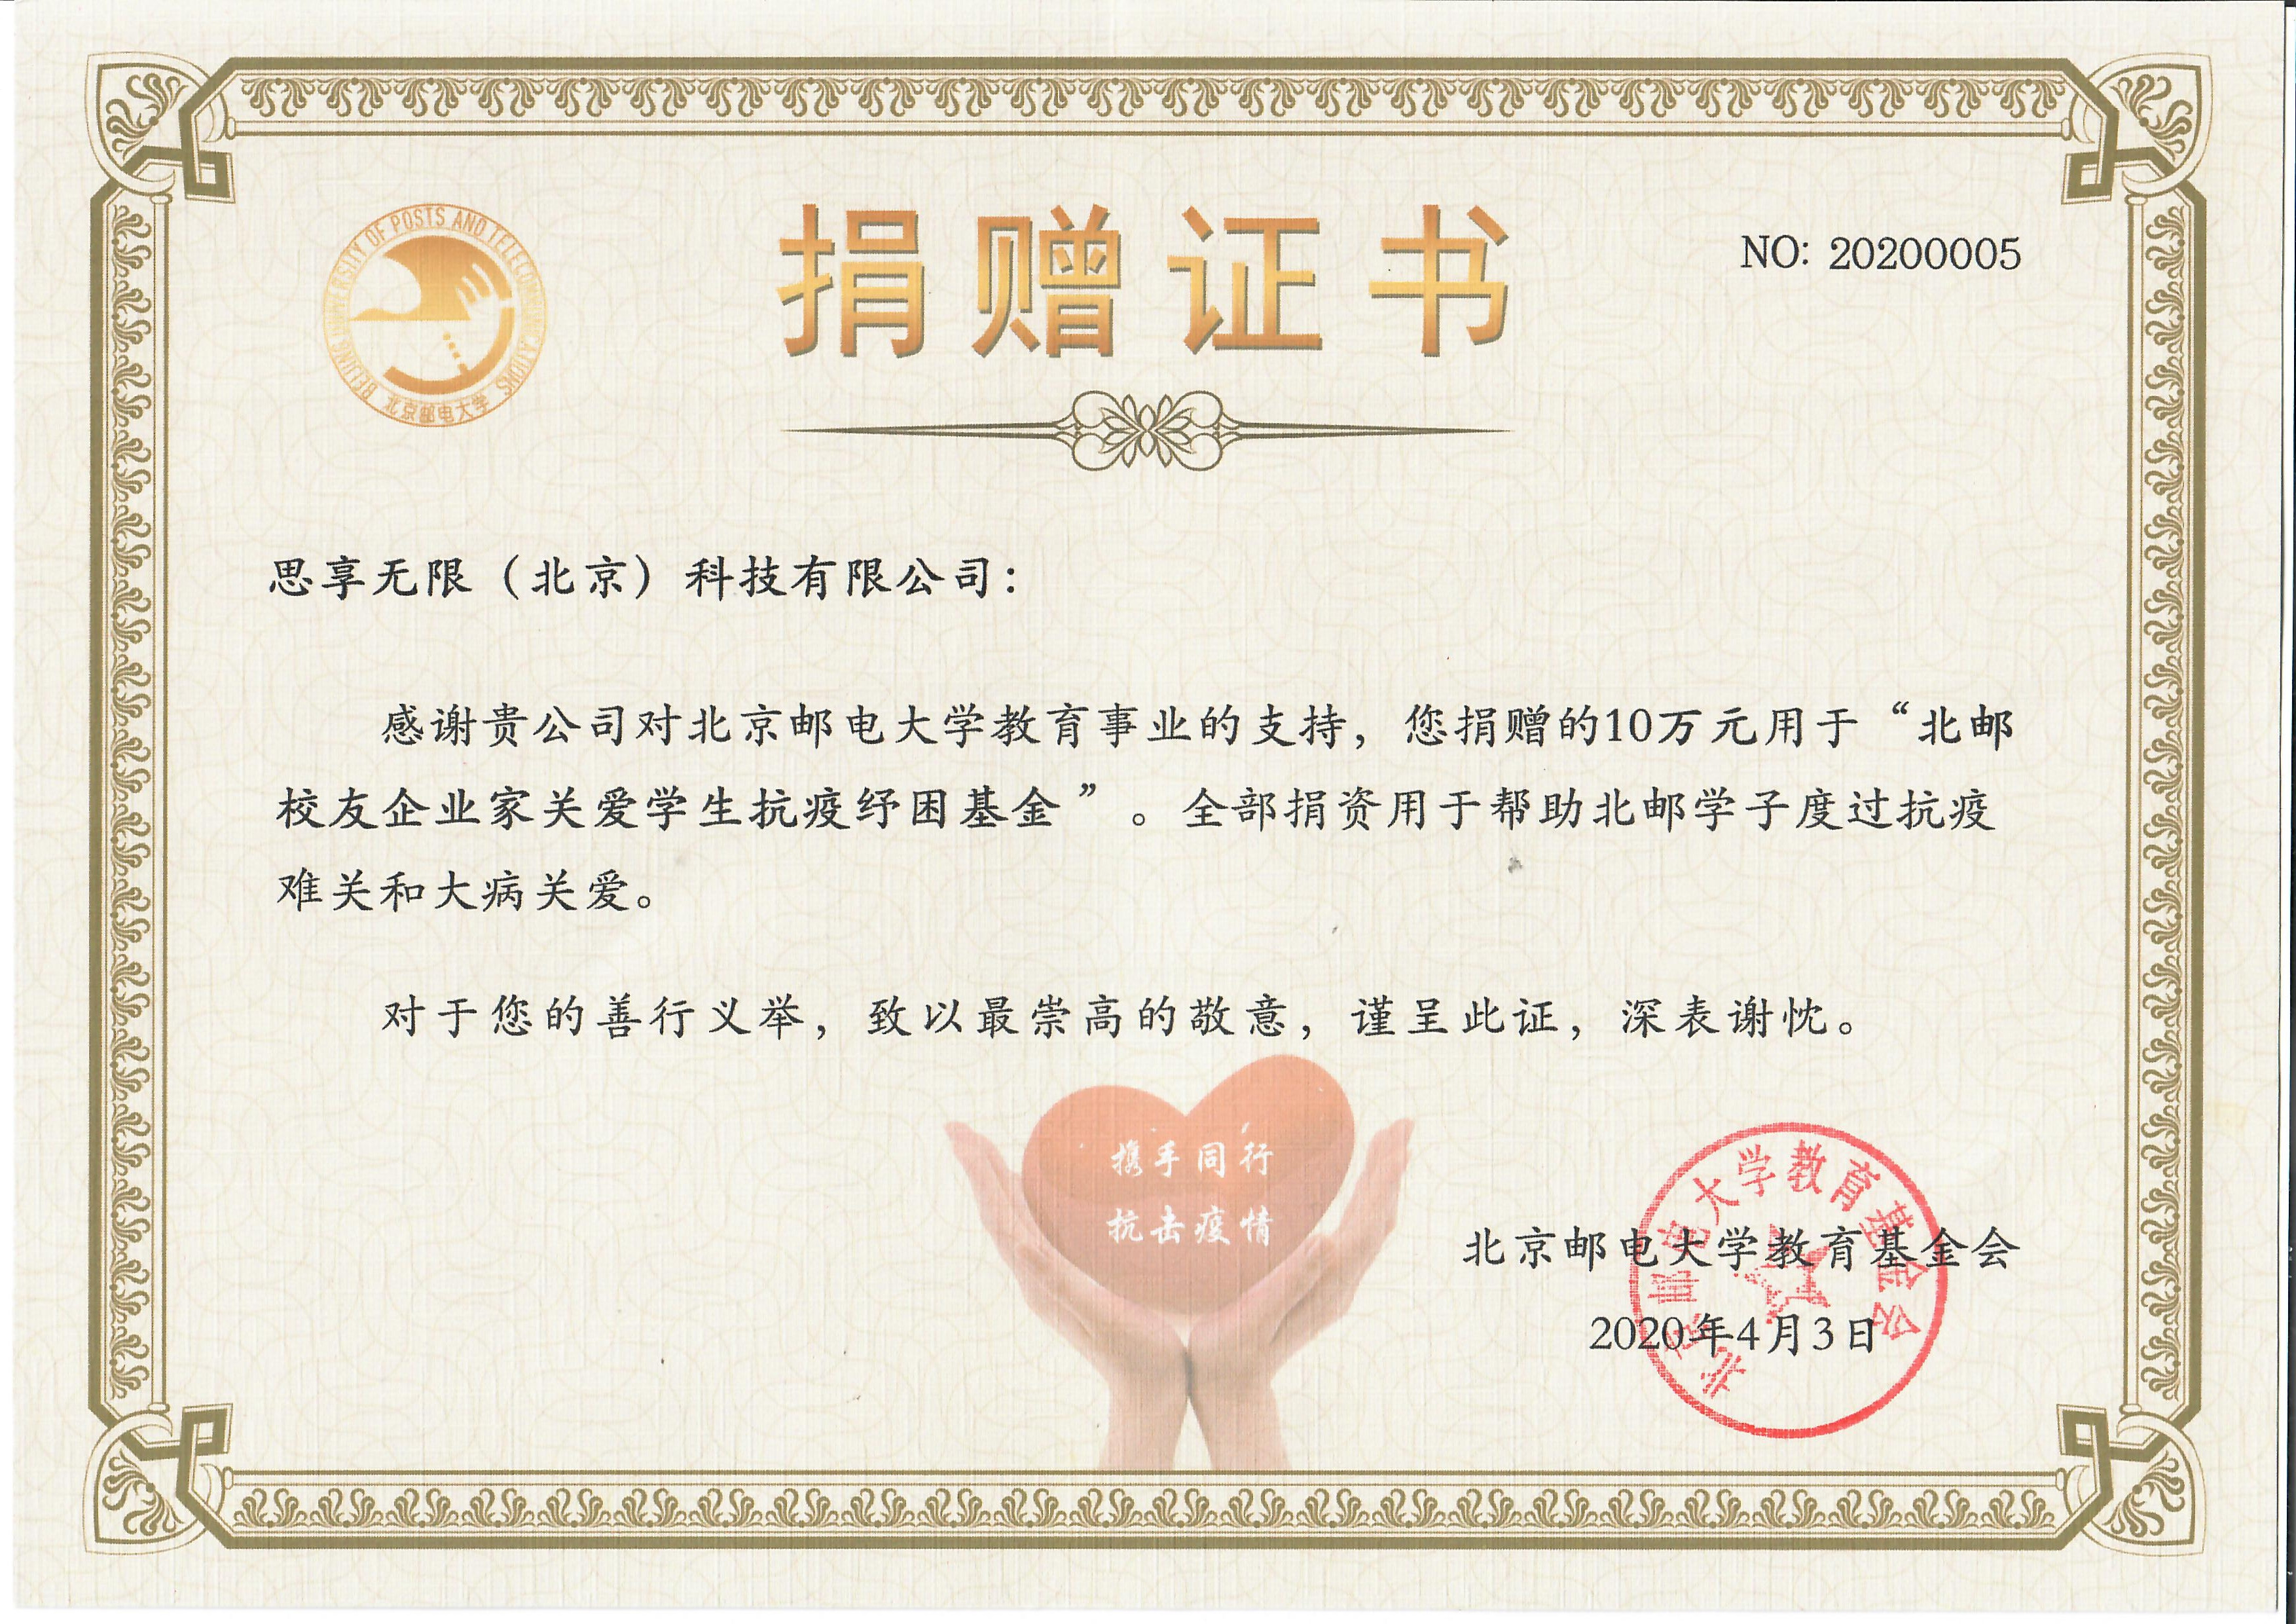                             Donation Certificate of "BUPT Alumni Entrepreneurs Care for Students Anti-epidemic Relief Fund"
                        